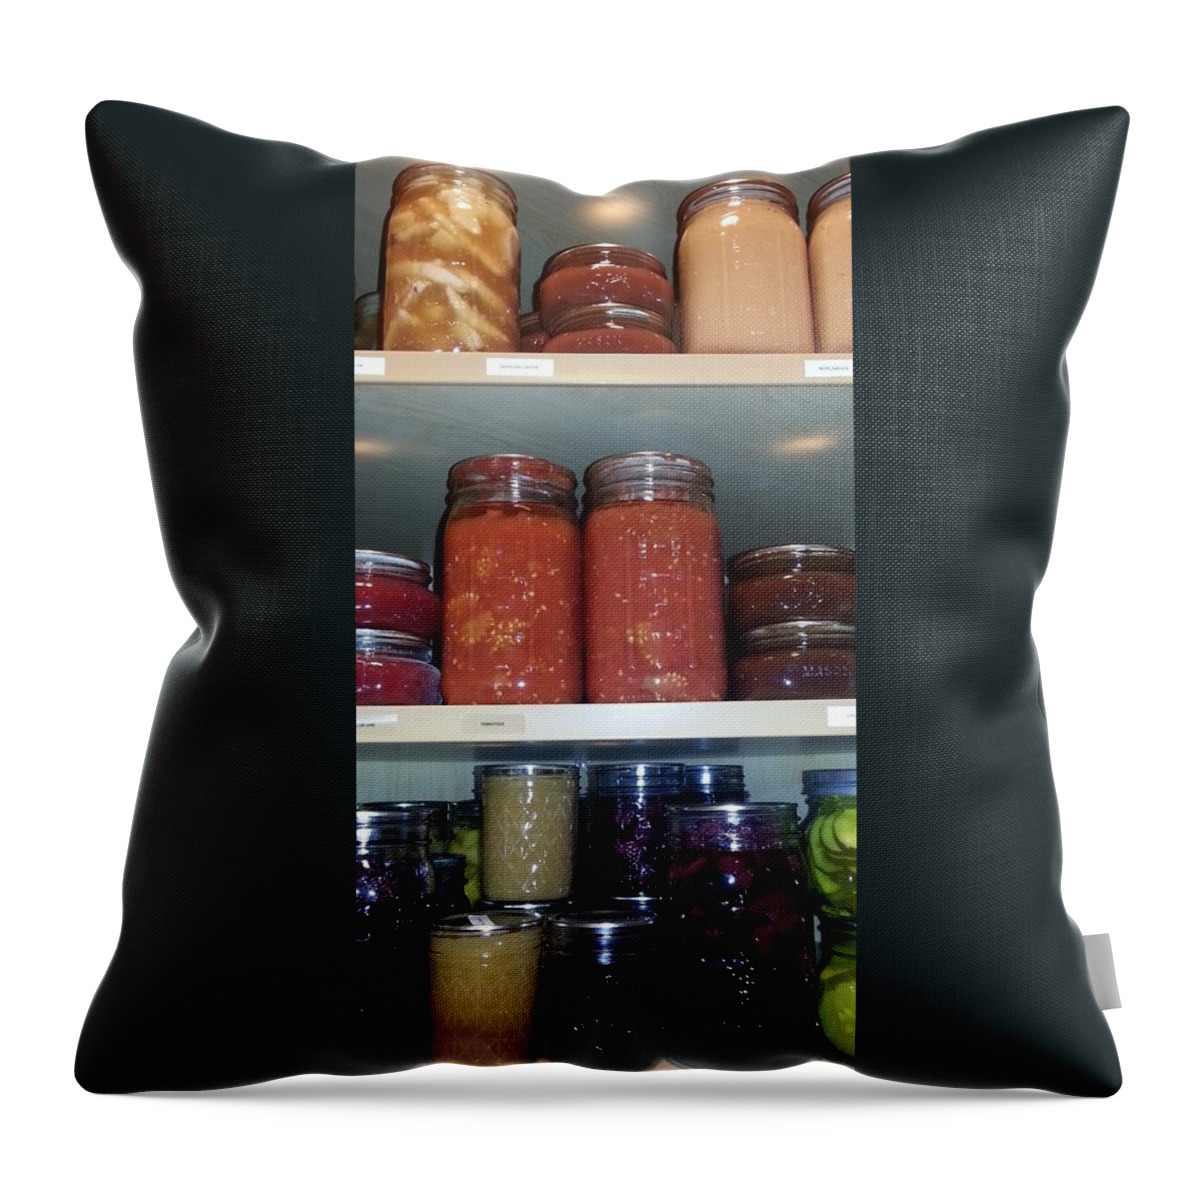 Jars Of Food Throw Pillow featuring the photograph Ready for Winter by Caryl J Bohn